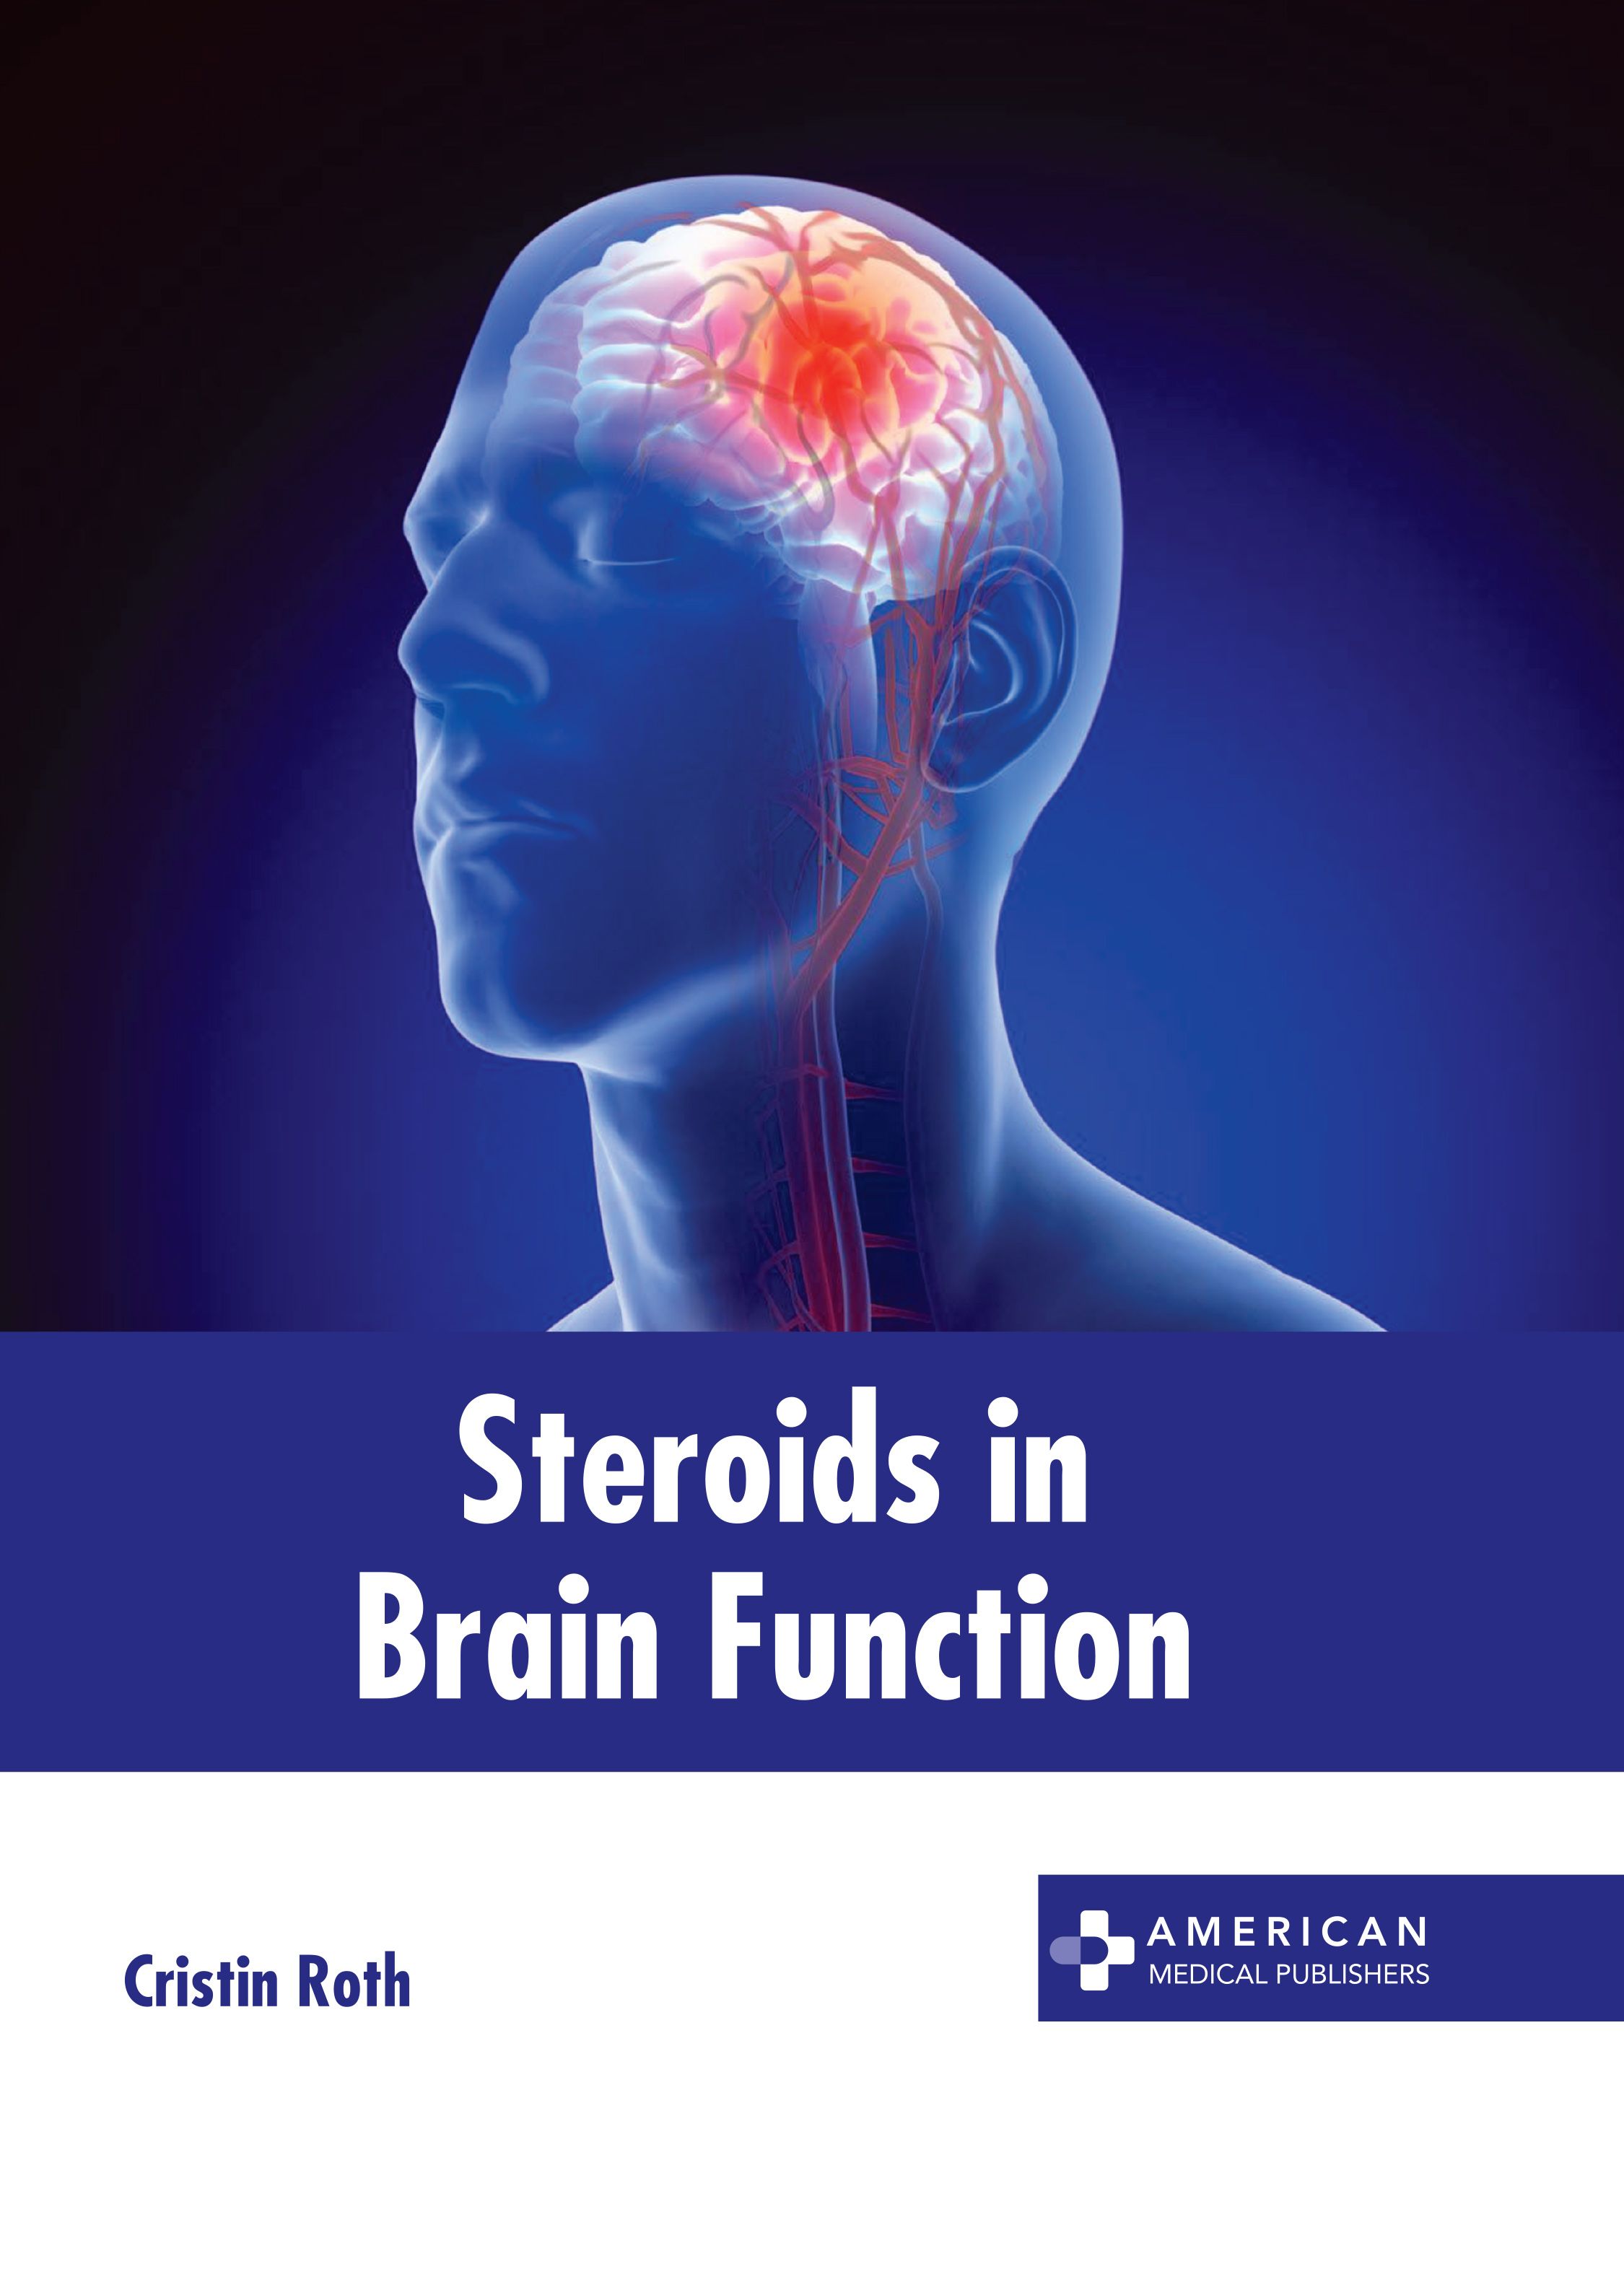 STEROIDS IN BRAIN FUNCTION